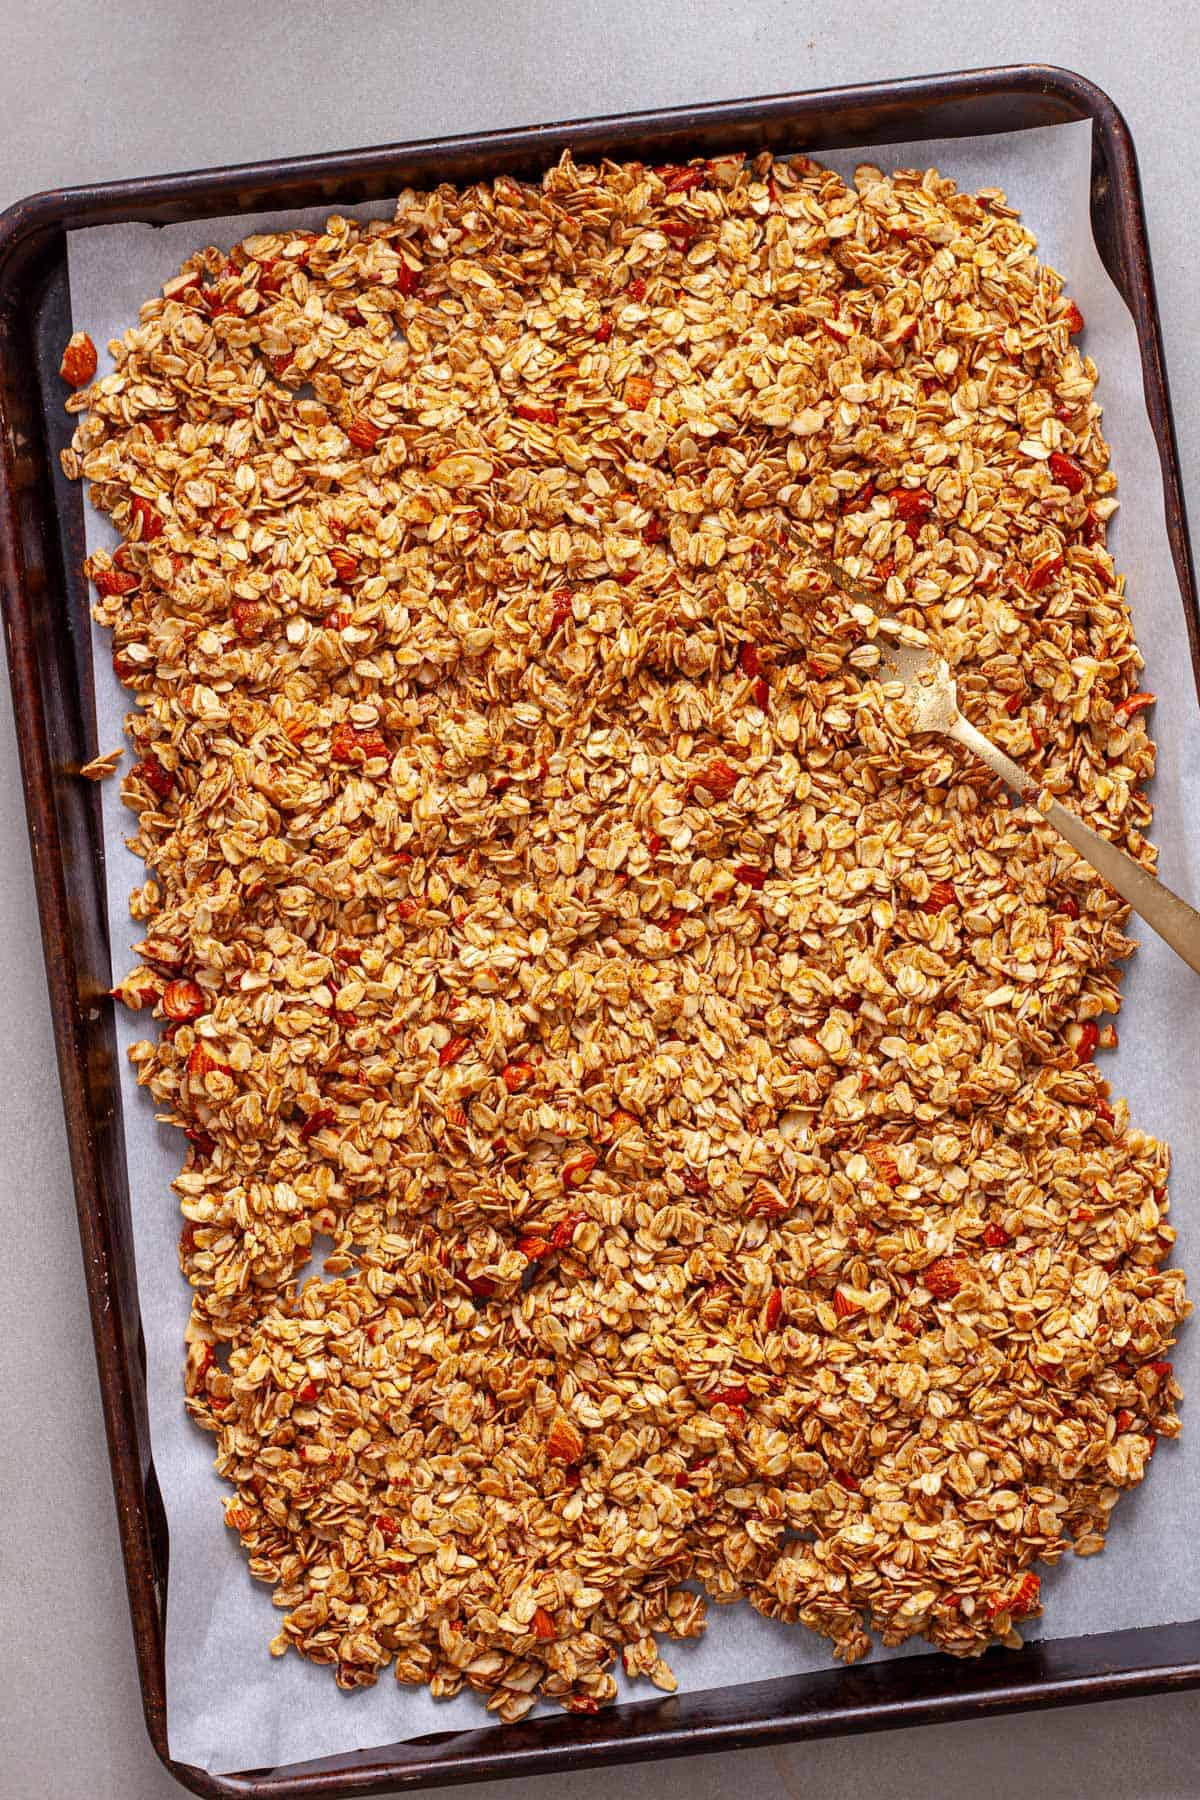 Uncooked cinnamon granola on a parchment lined baking sheet.